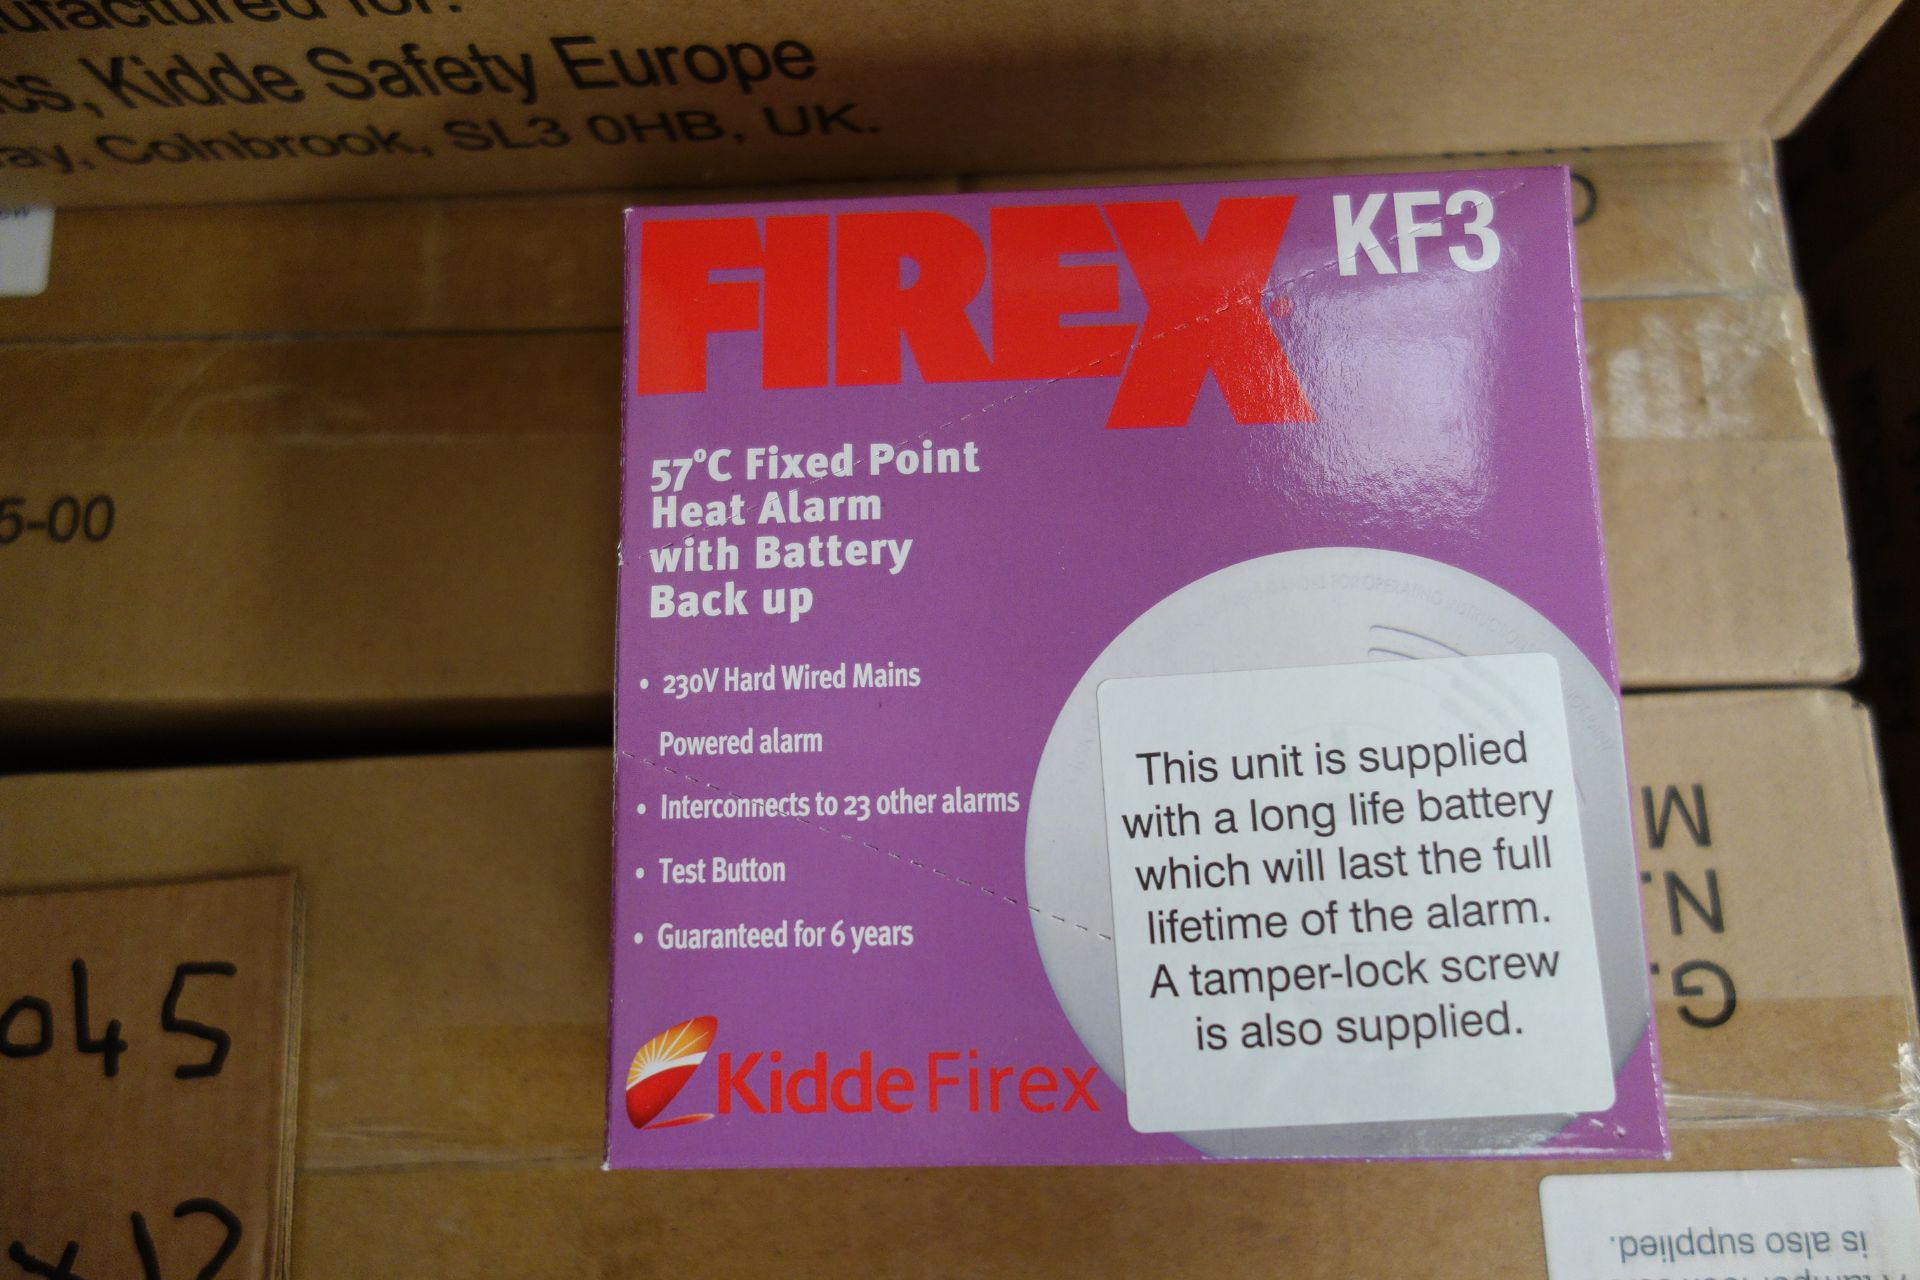 12 X Firex KF3 57C Fixed Point Heat Alarm With Battary Back Up Interconnects to 23 Other Alarms